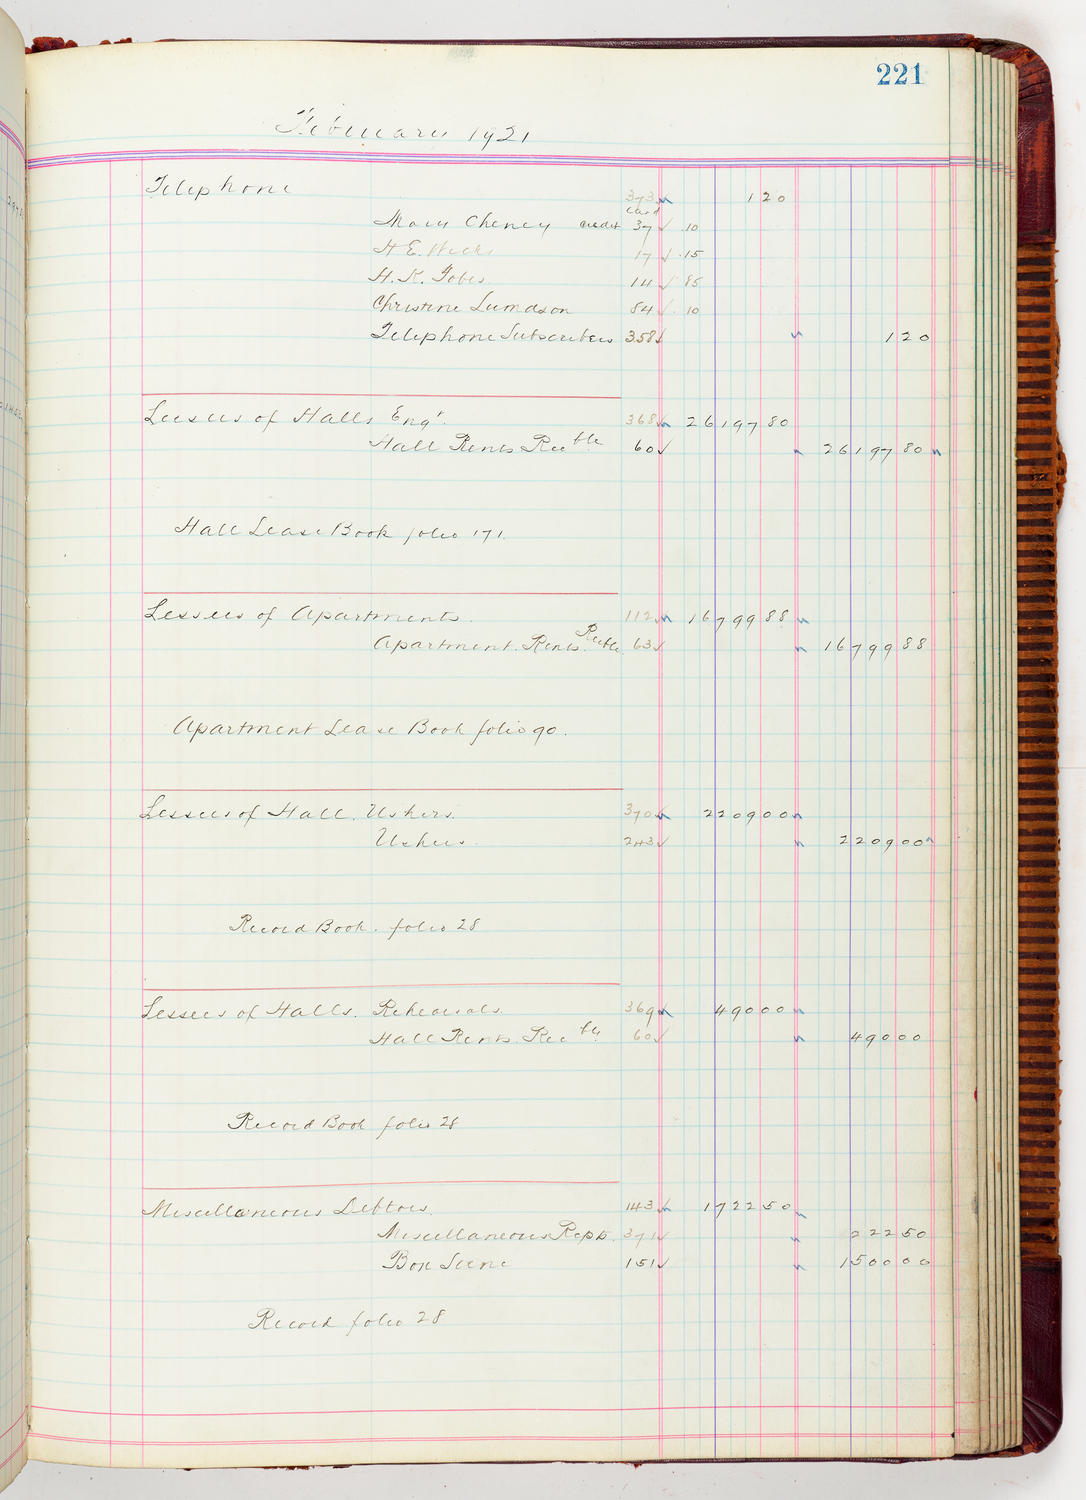 Music Hall Accounting Ledger, volume 5, page 221